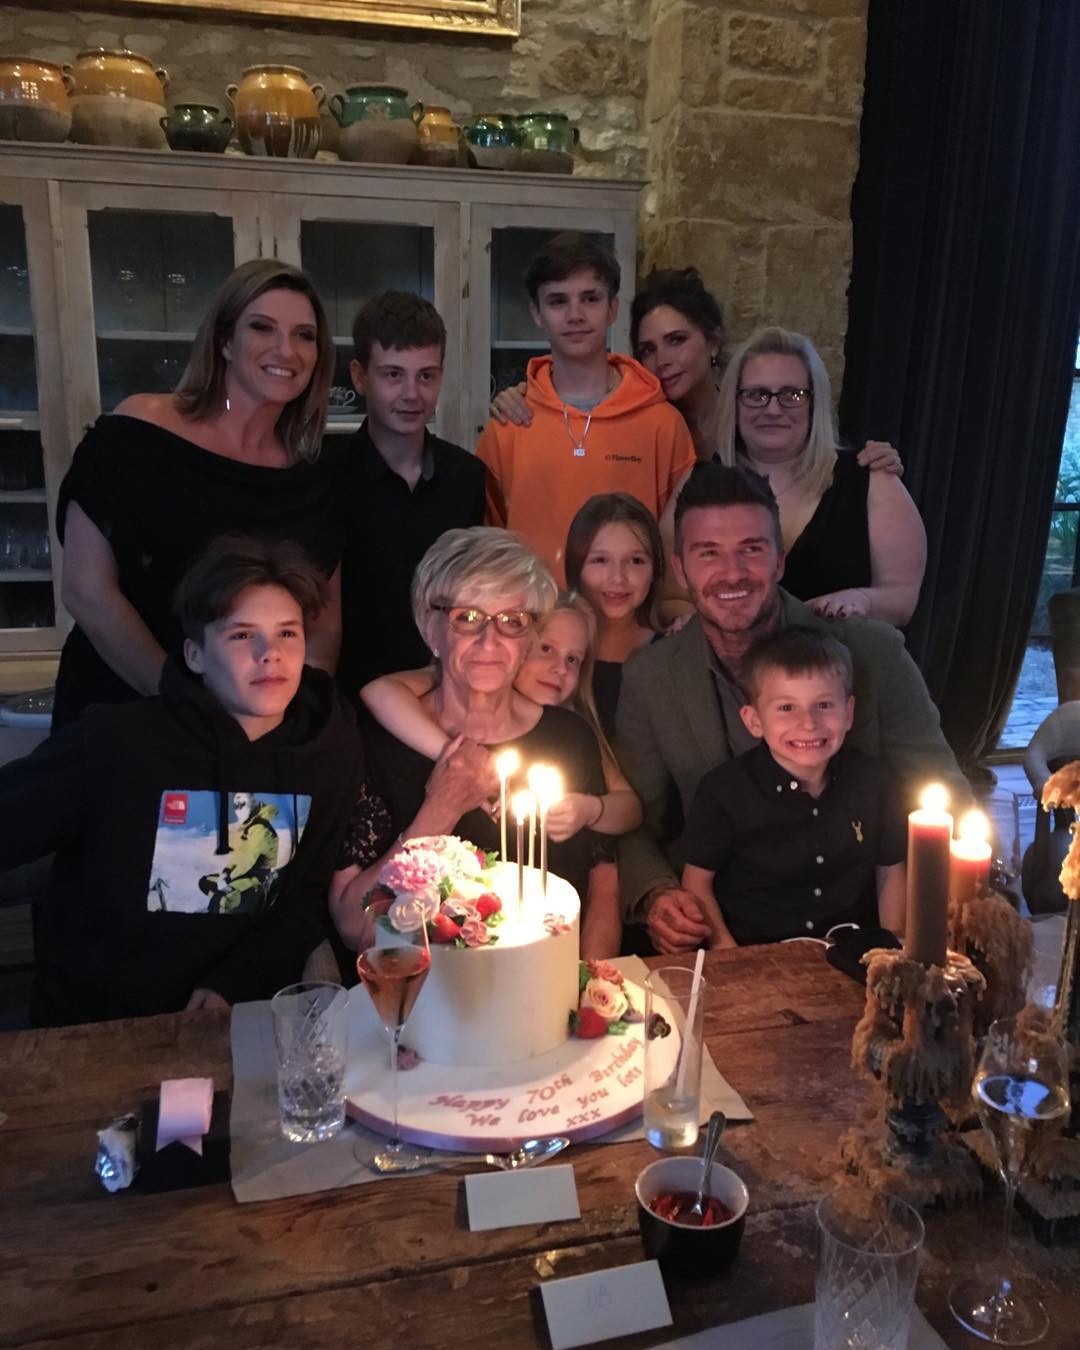 Victoria Beckham shares a lovely birthday tribute to mother-in-law